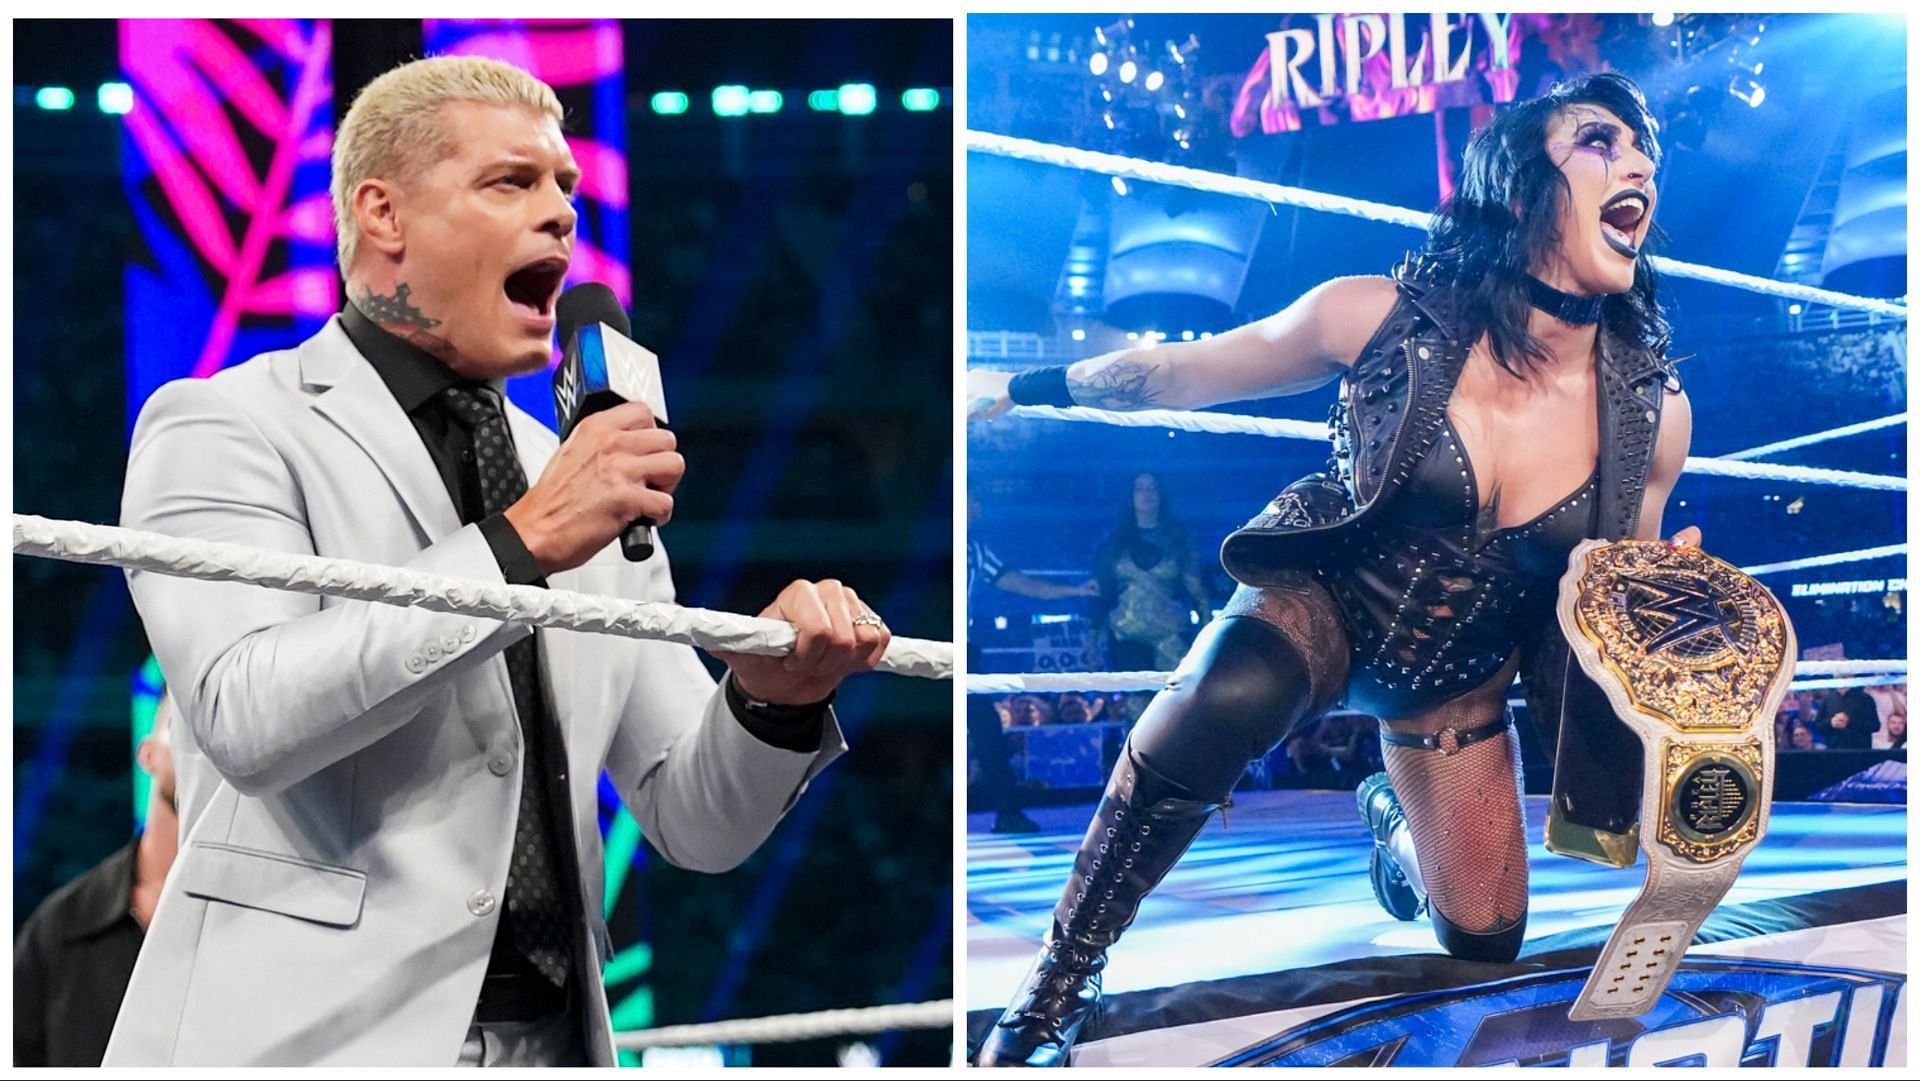 Cody Rhodes and Rhea Ripley appear at WWE Elimination Chamber in Austraia